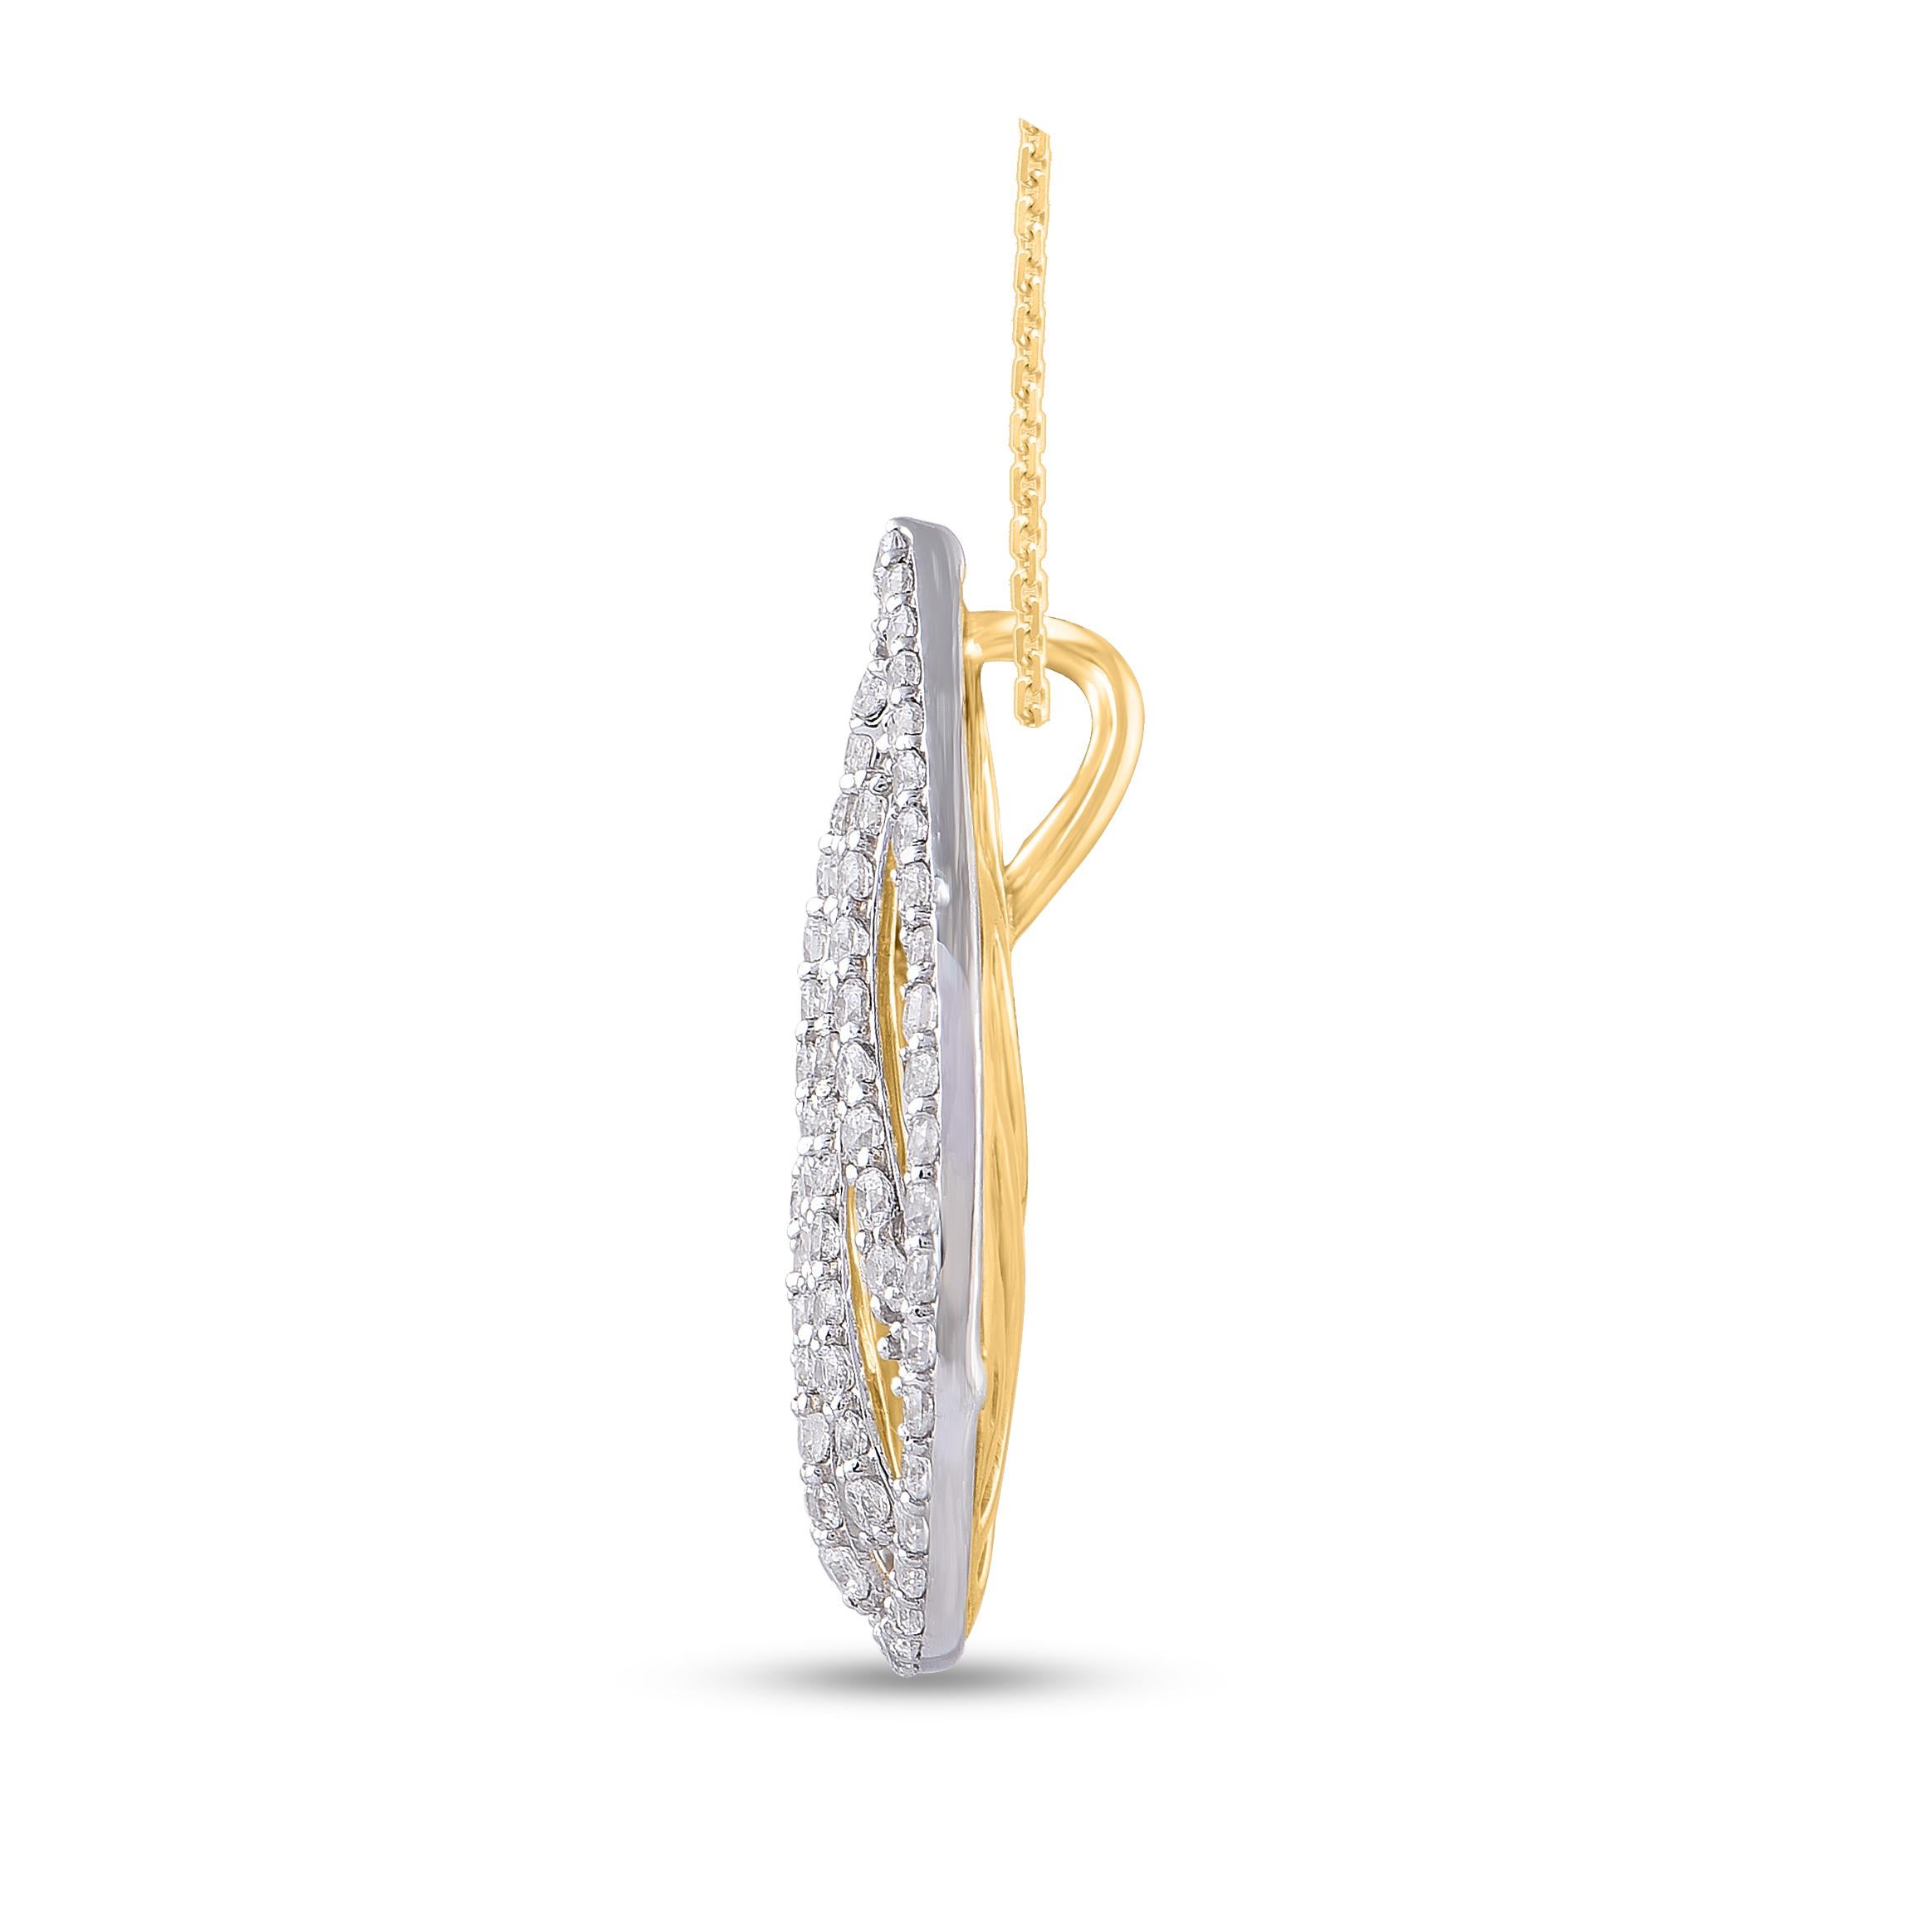 This diamond pear pendant necklace fits any occasion with ease. These pendants are studded with 96 brilliant cut natural diamonds in prongs setting in 18kt yellow gold. Diamonds are graded as H-I color and I-2 clarity. Pendant suspends along a cable